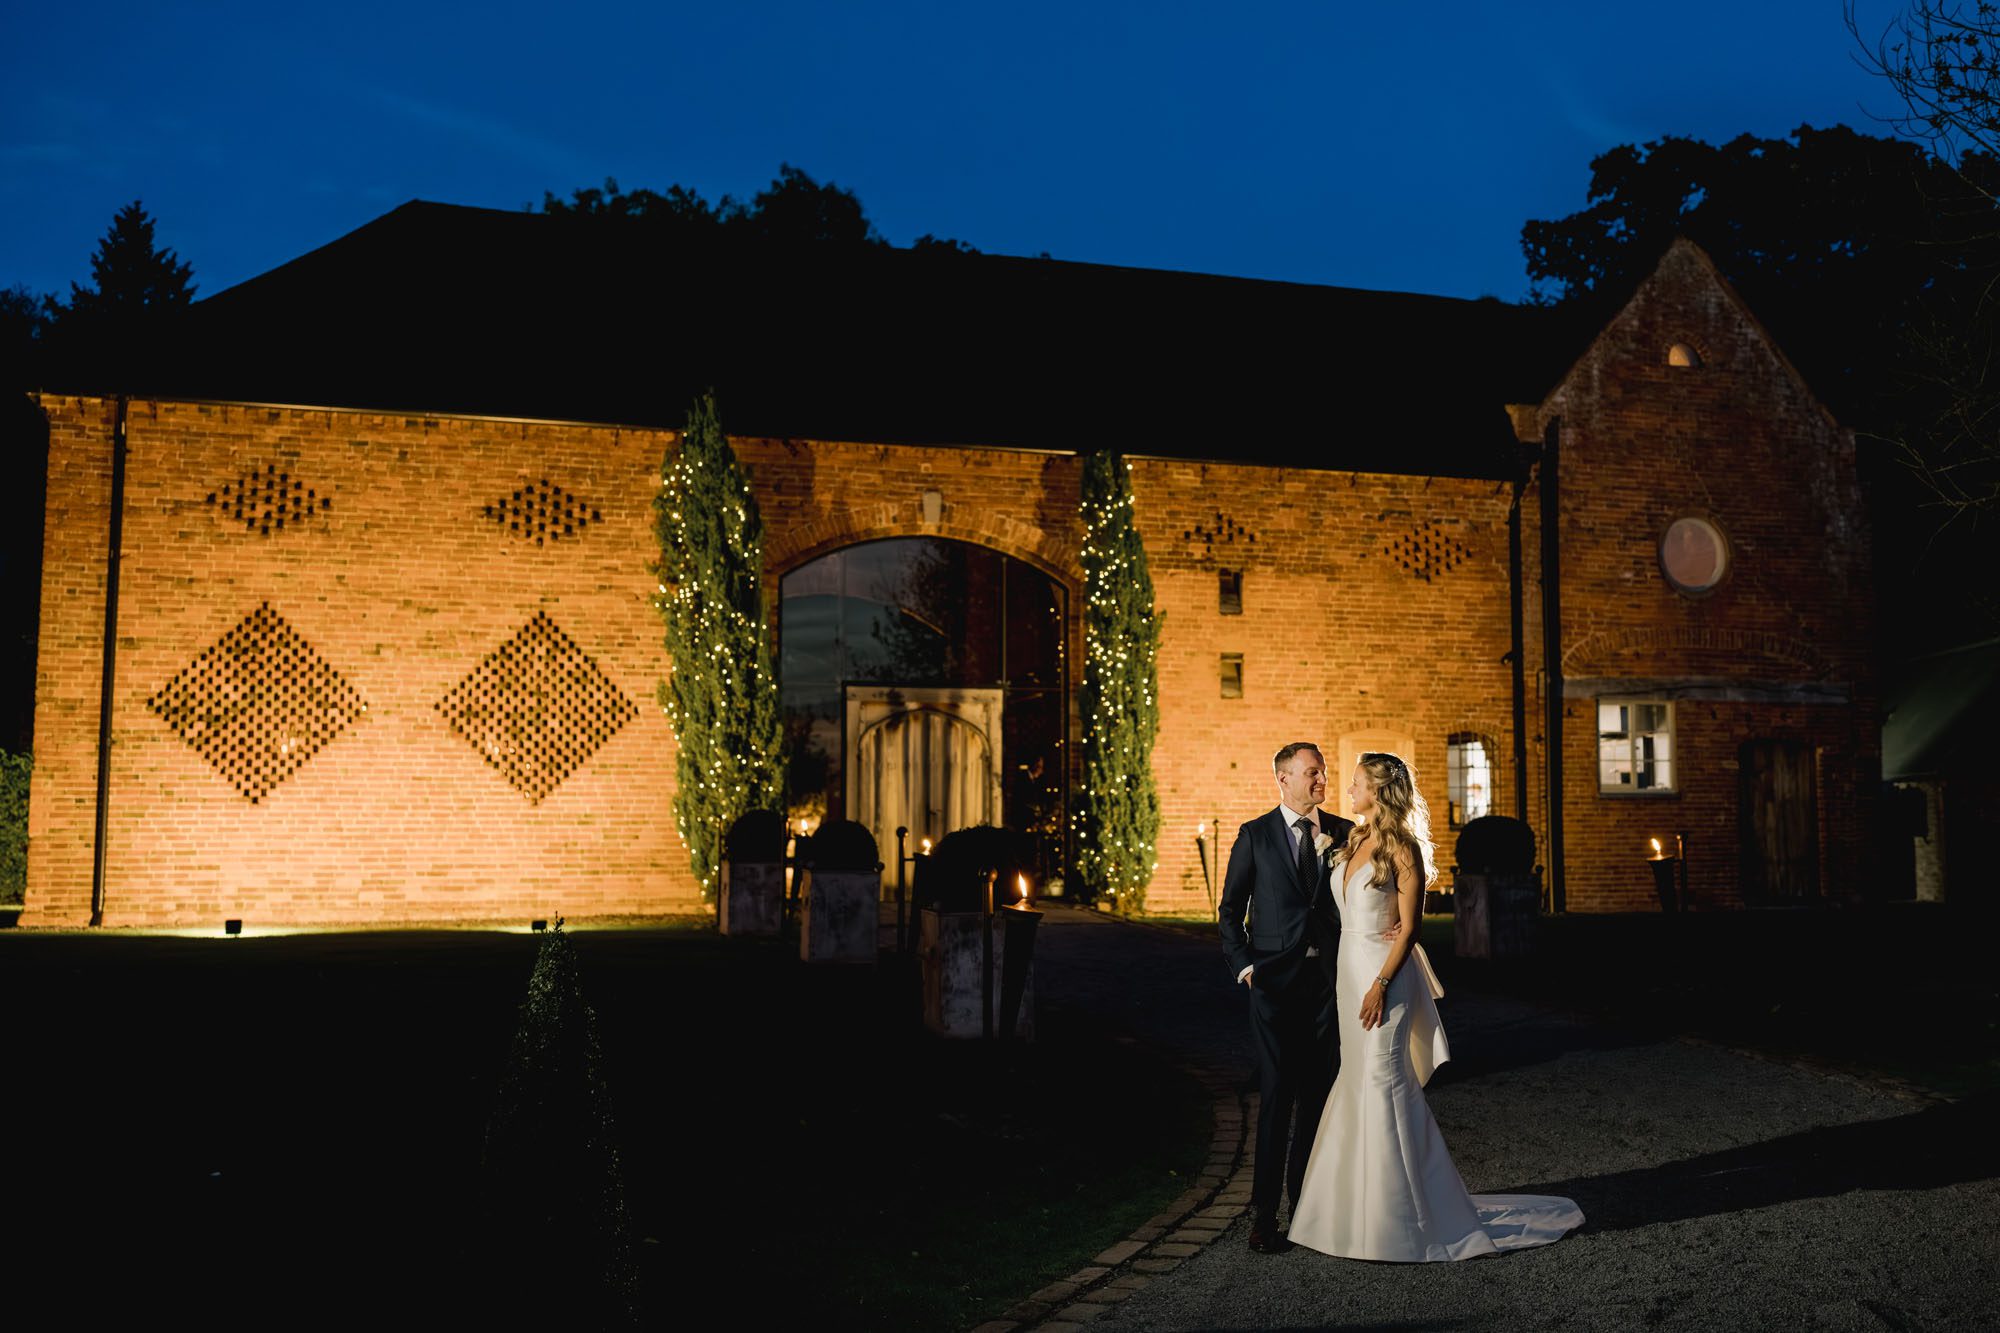 Bride and groom stare lovingly in to each other's eyes under a twilight sky on their wedding day at Shustoke Barn.